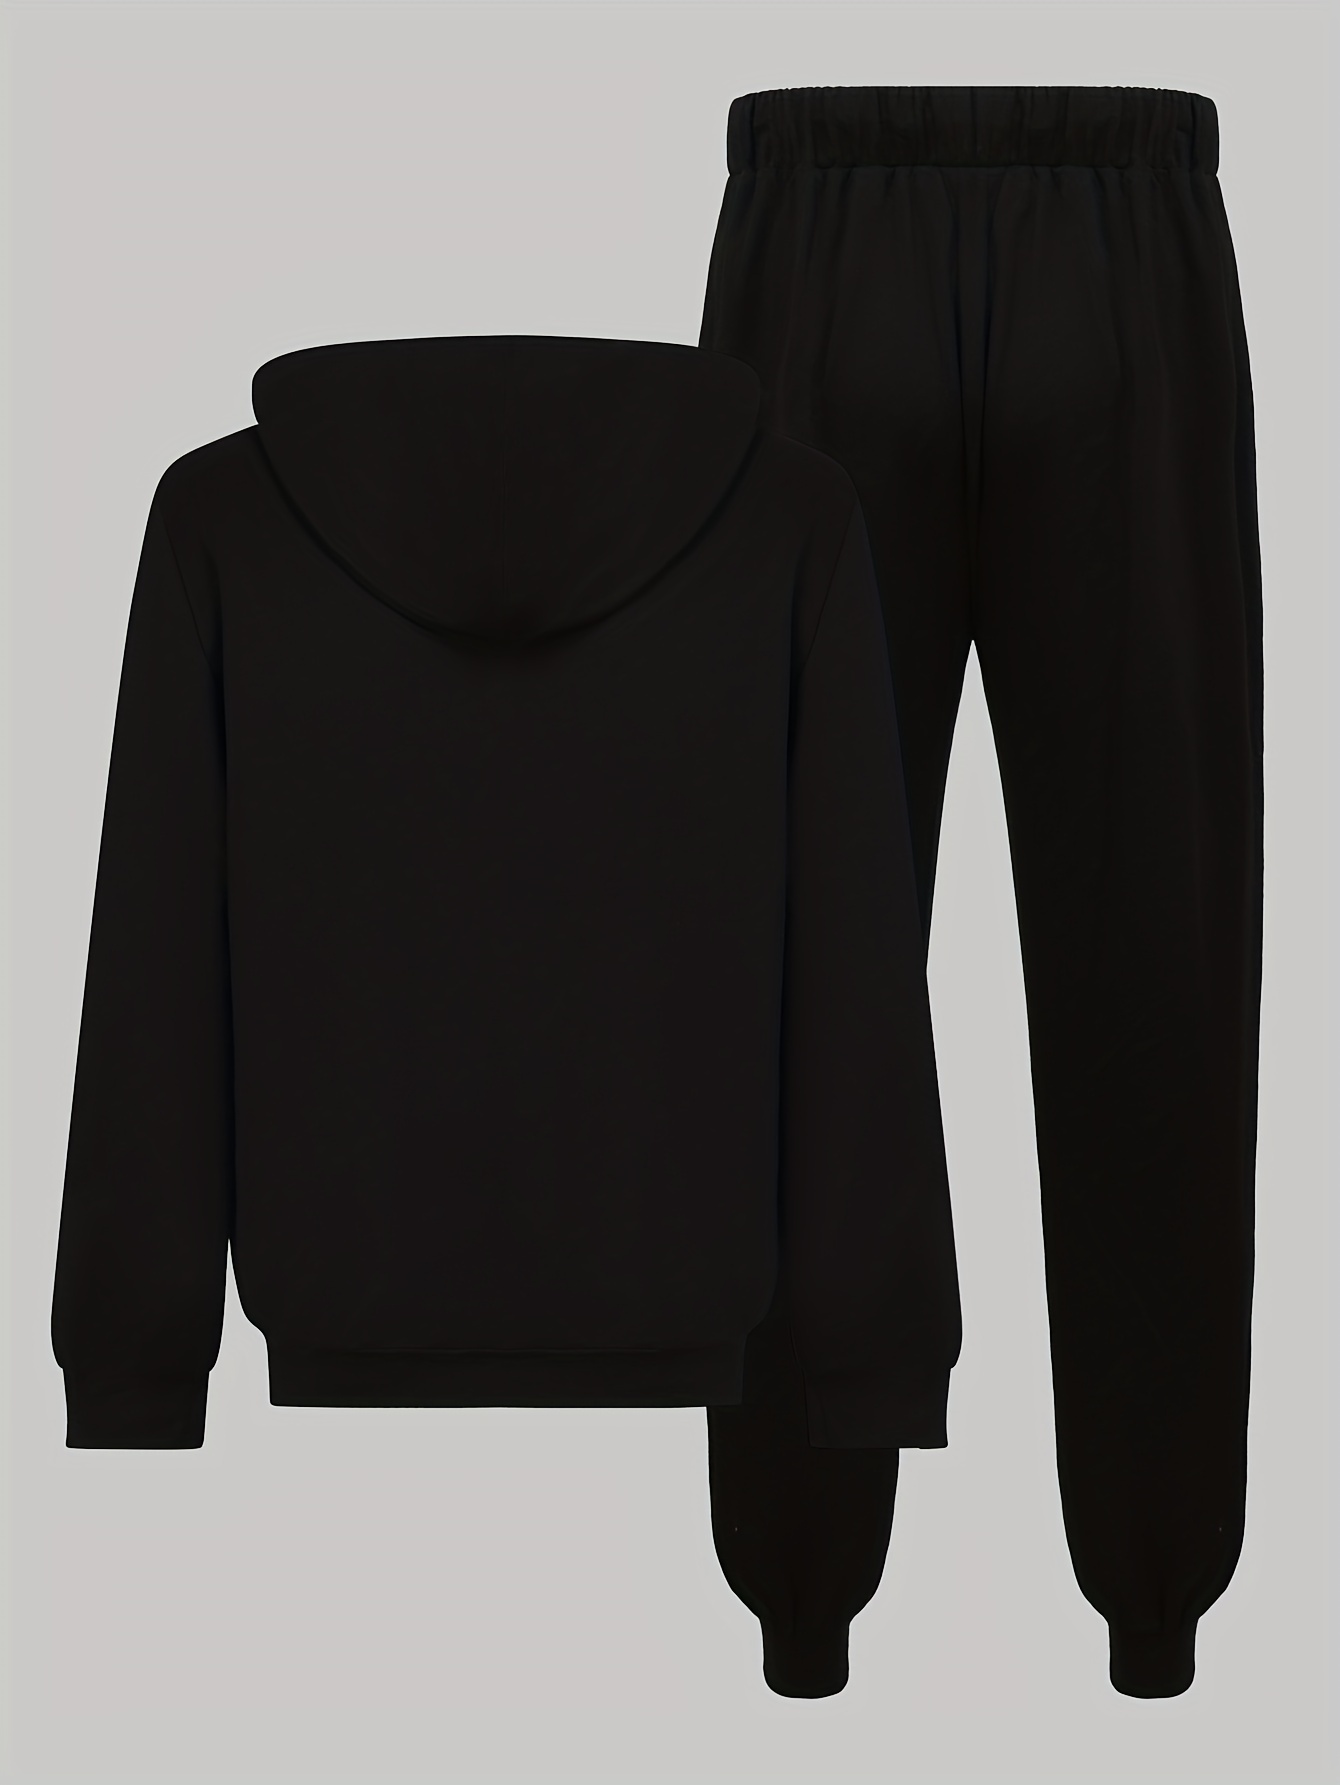 TRACKSUIT- Black Printed Tracksuit For Men & Boys - Soft and Comfy Printed  Tracksuit